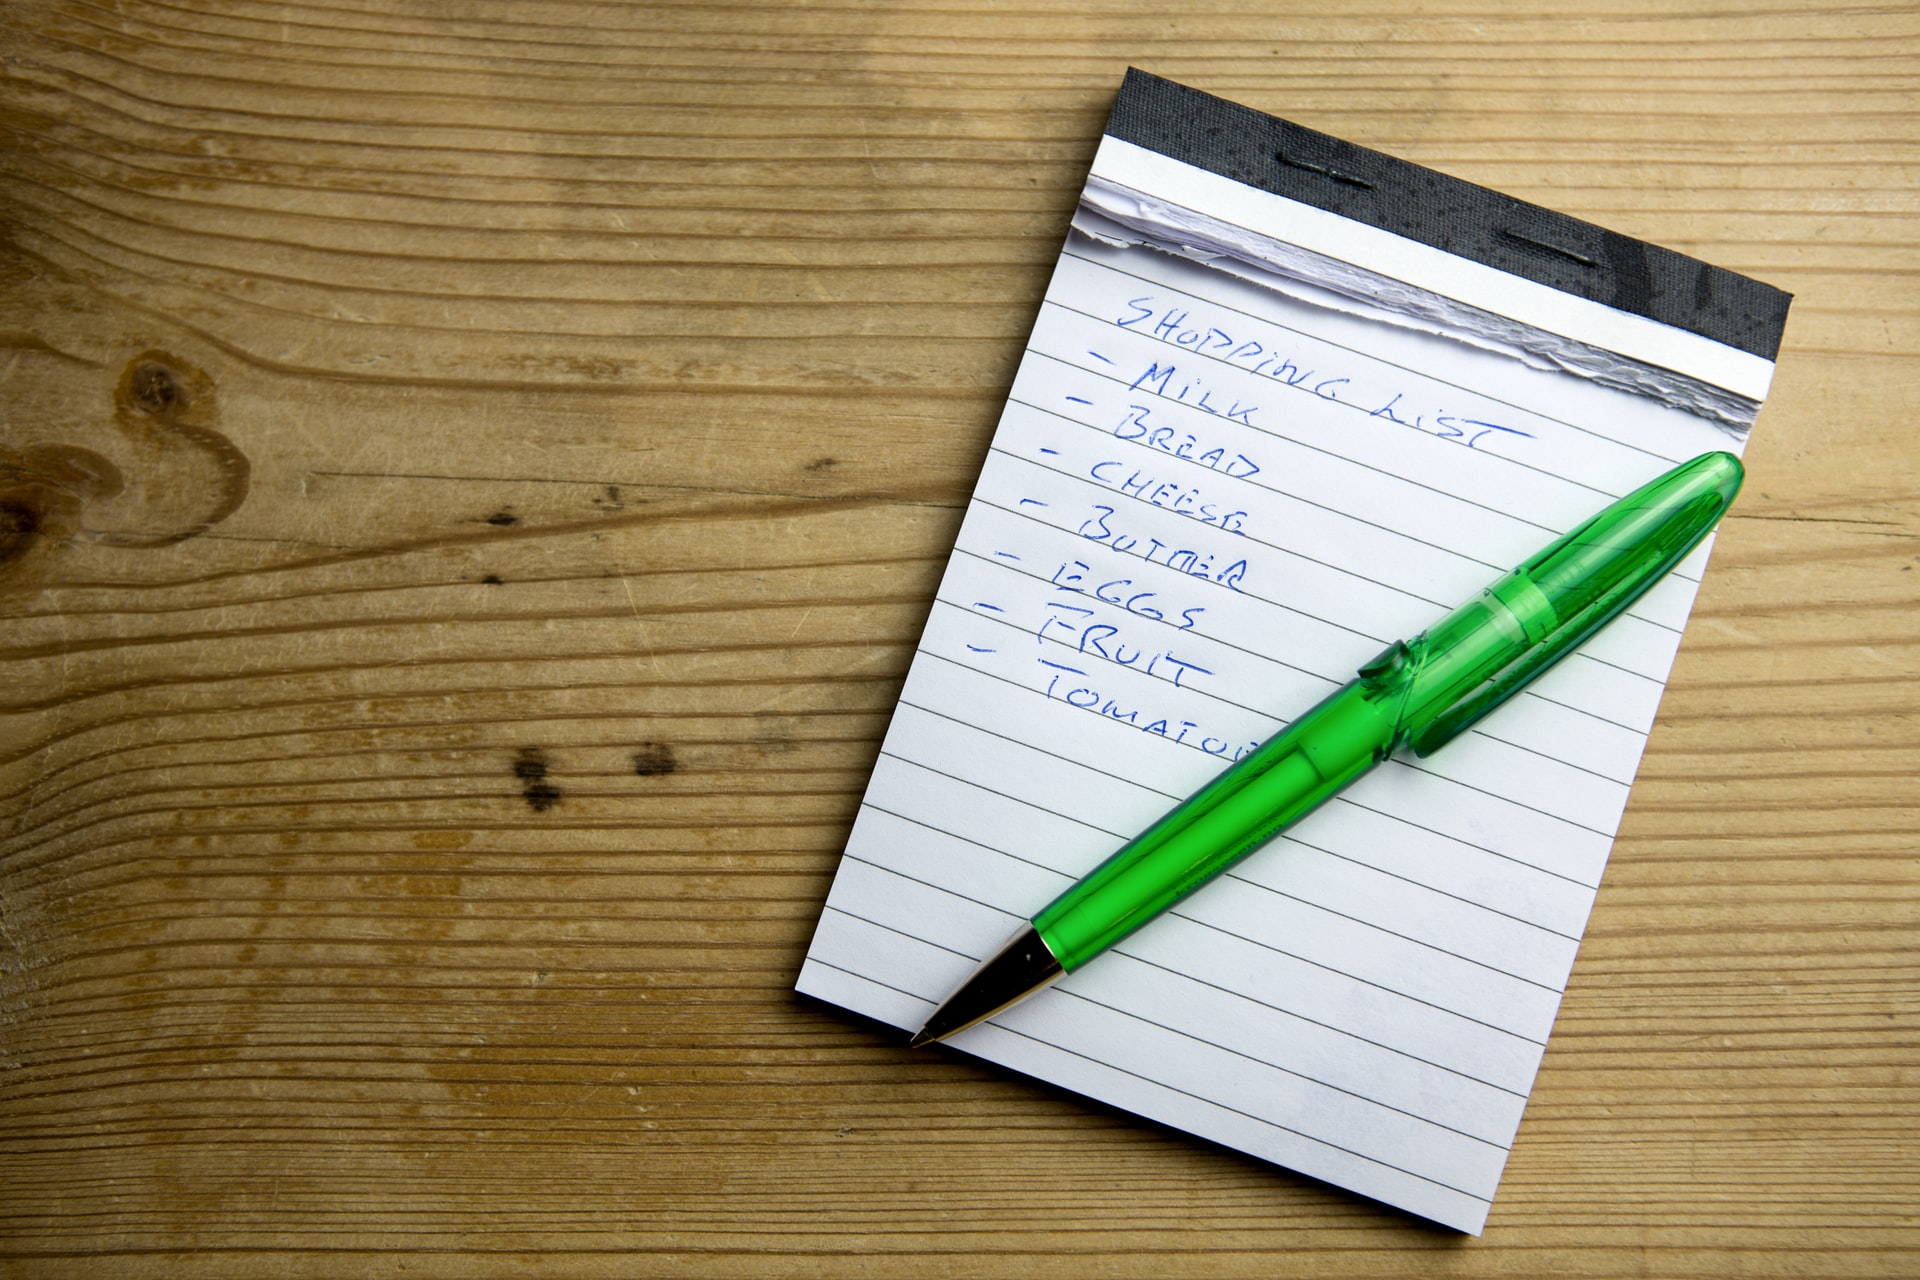 A photo of a shopping list written on a note pad with a green pen laid on top of the notepad.